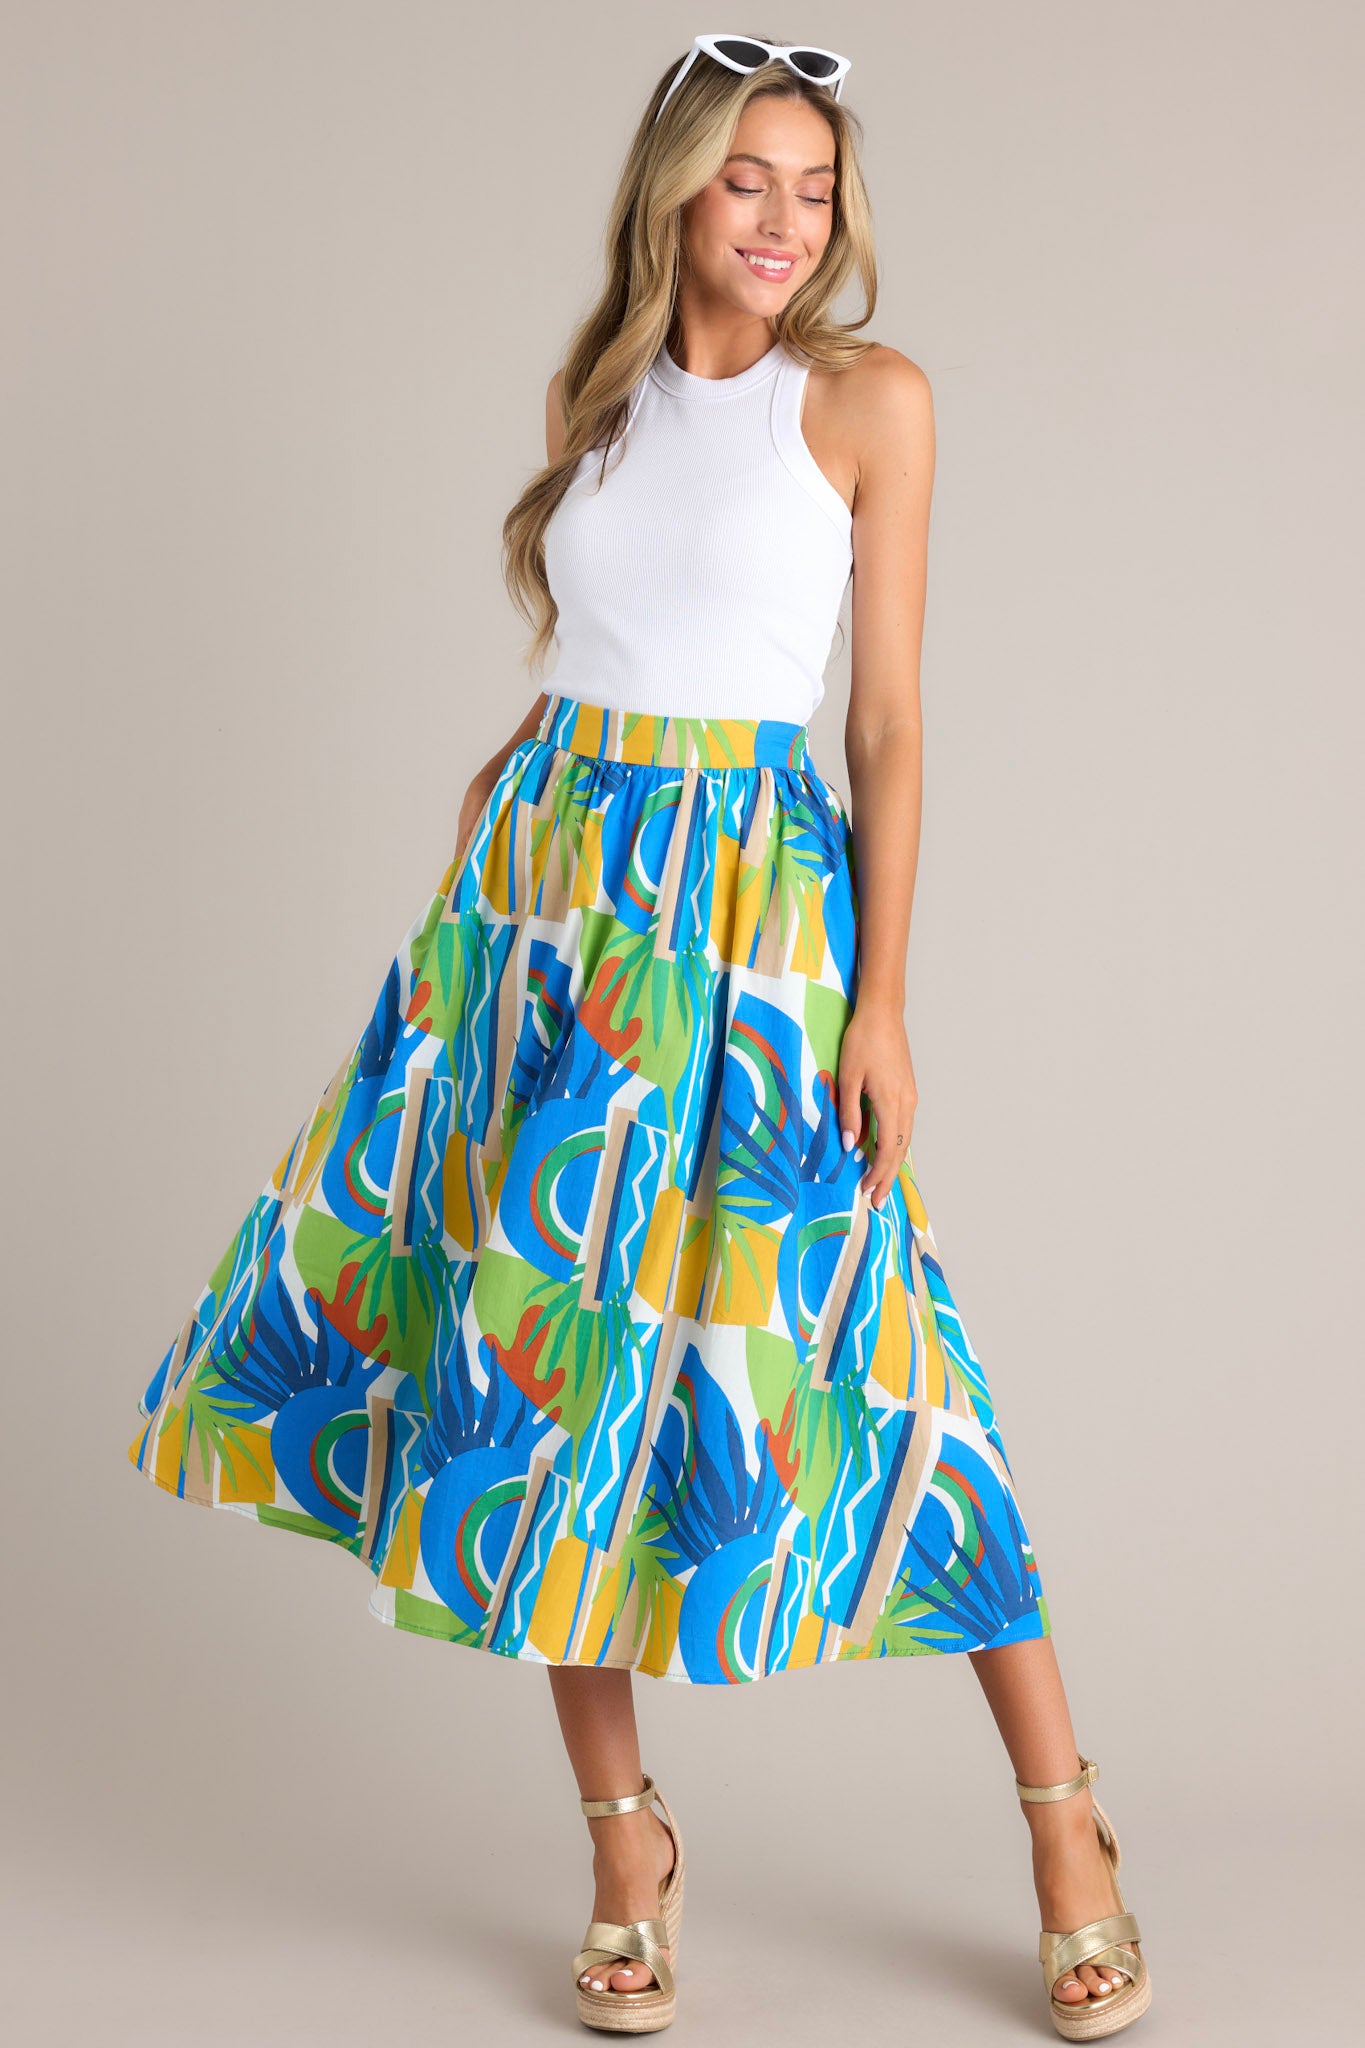 Full length view of a high-waisted A-line skirt with a vibrant abstract pattern in blue, green, and yellow.